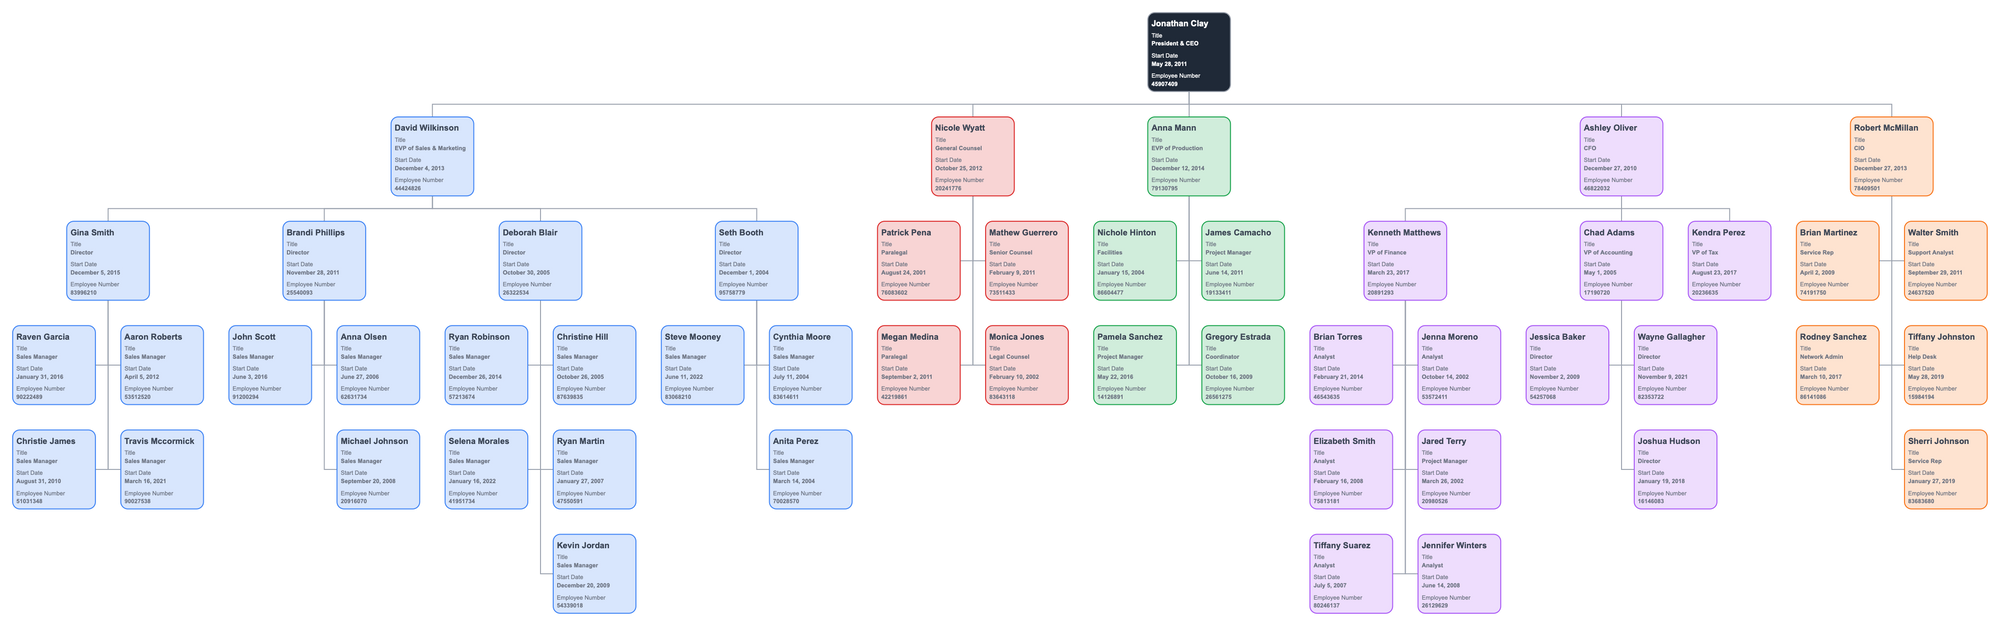 Design org chart from Excel data